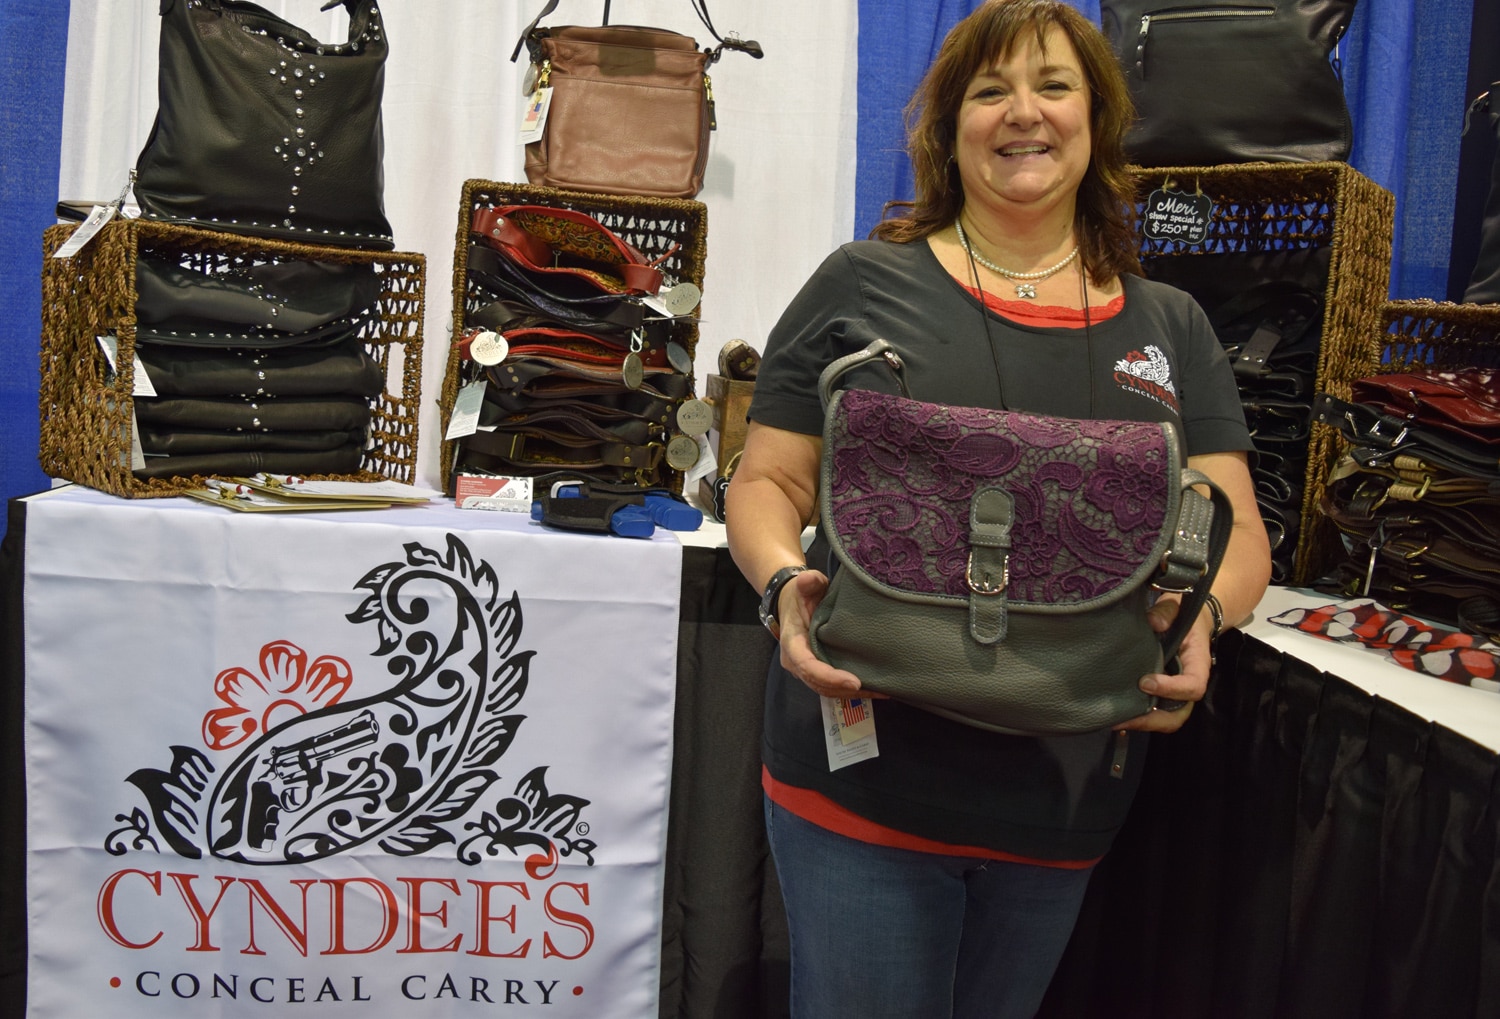 Cyndee Harding, owner and designer of Cyndee's Conceal Carry, highlights her bags and lacy motif. (Photo: Daniel Terrill/Guns.com)